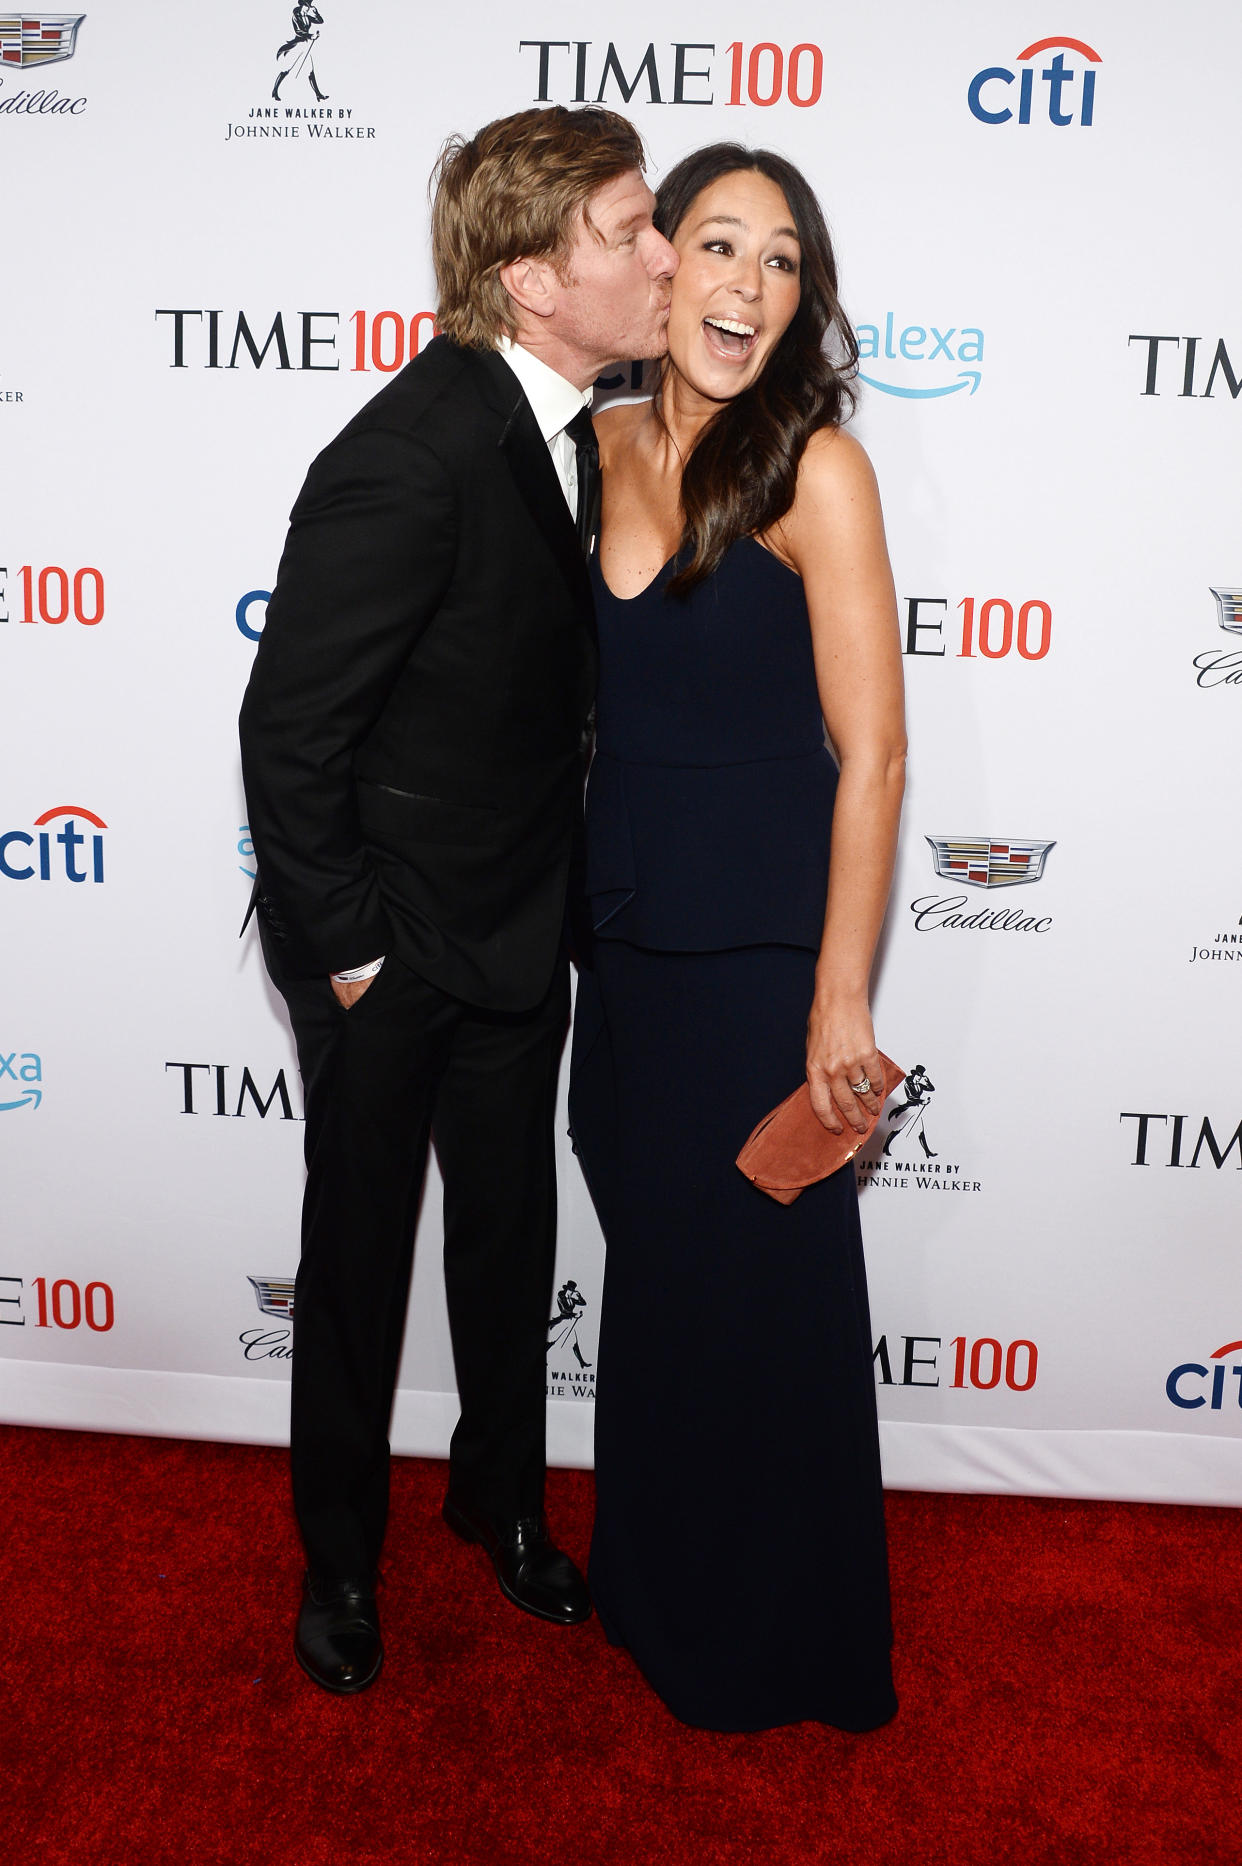 NEW YORK, NEW YORK - APRIL 23: Chip Gaines and Joanna Gaines attend the TIME 100 Gala 2019 Lobby Arrivals at Jazz at Lincoln Center on April 23, 2019 in New York City. (Photo by Noam Galai/Getty Images for TIME)